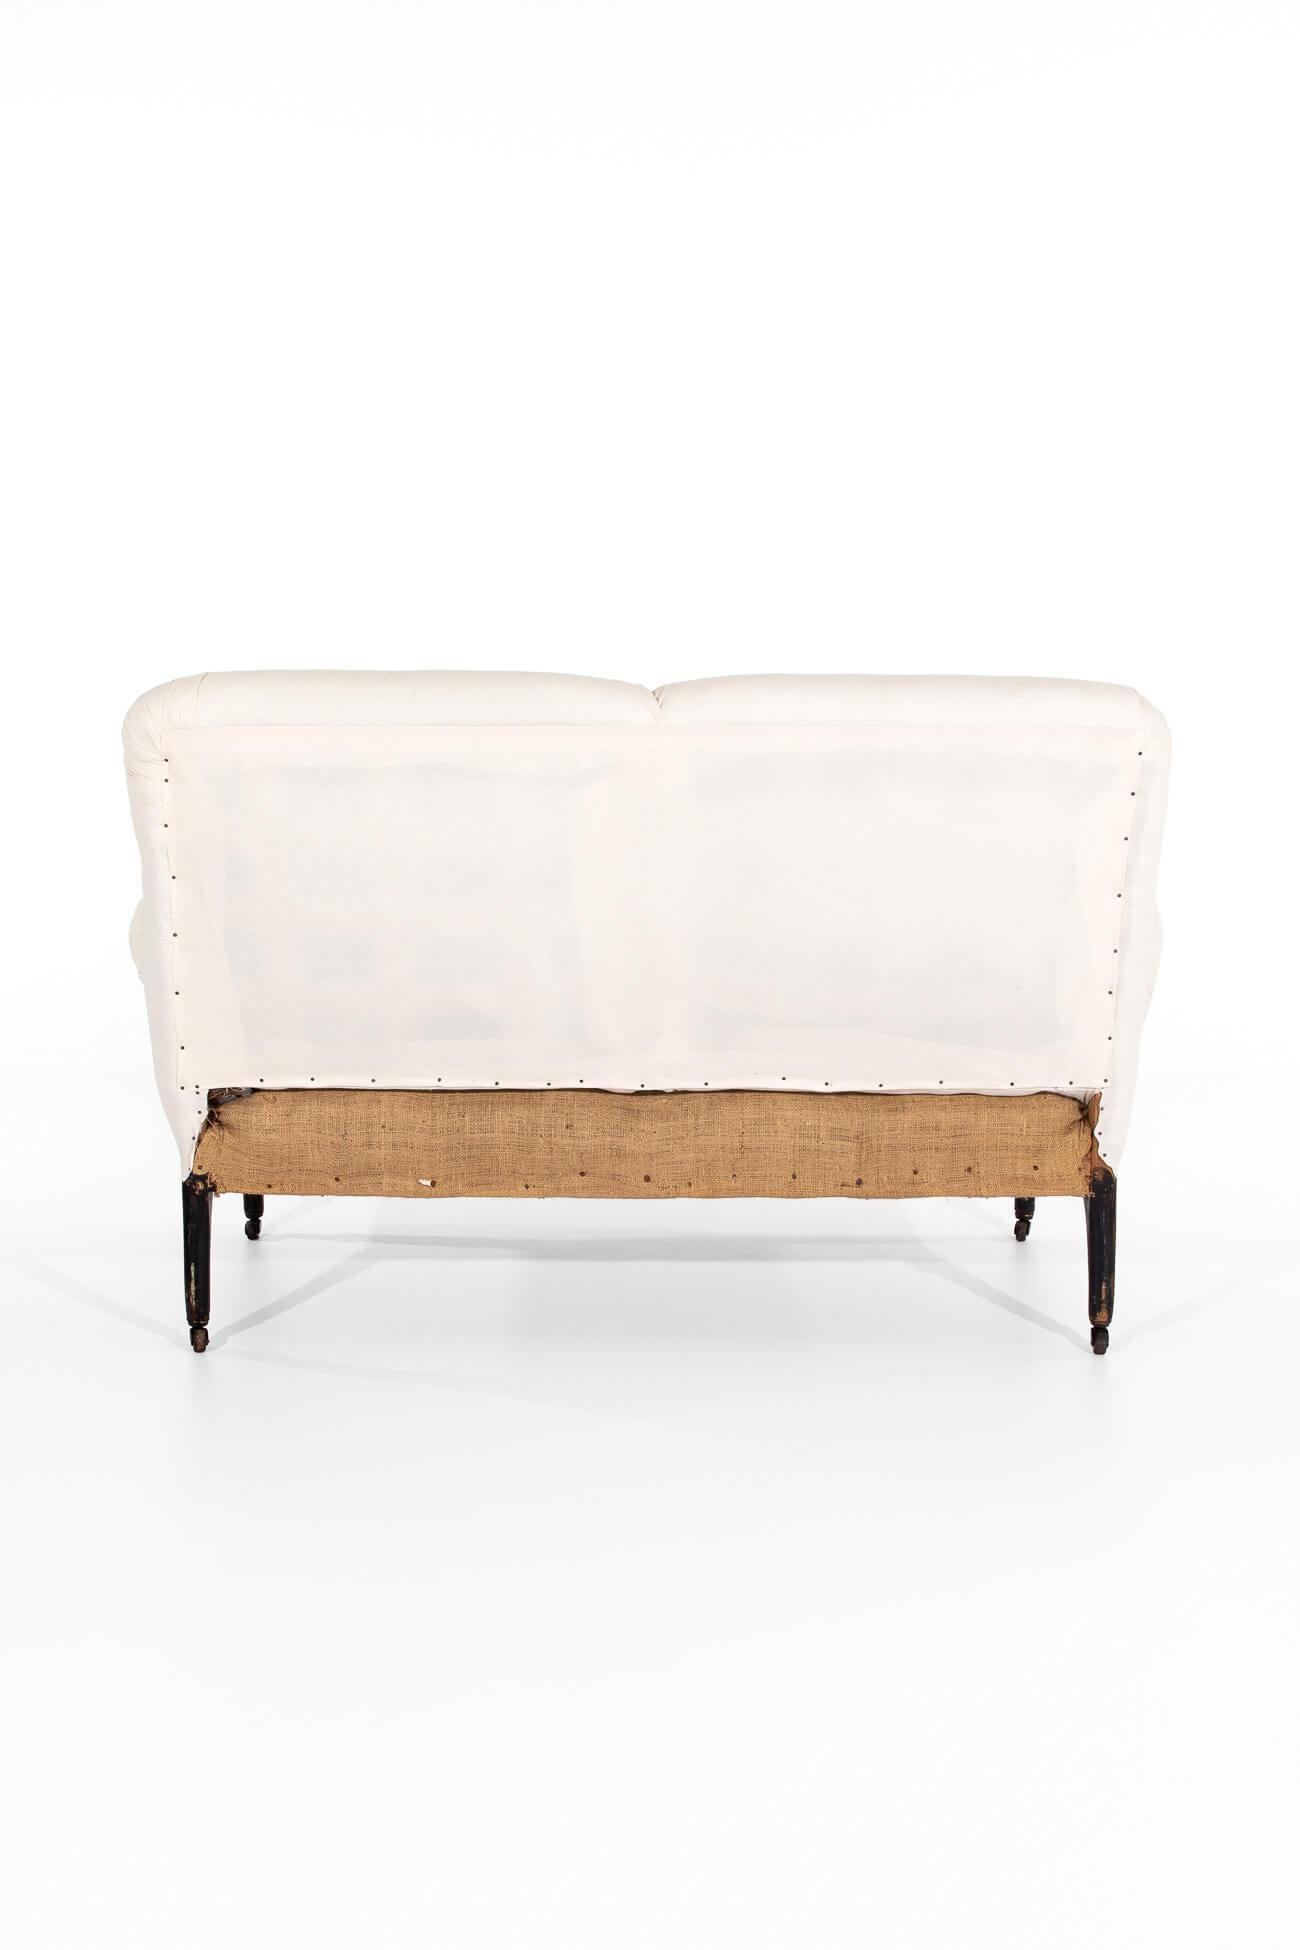 deconstructed french couch